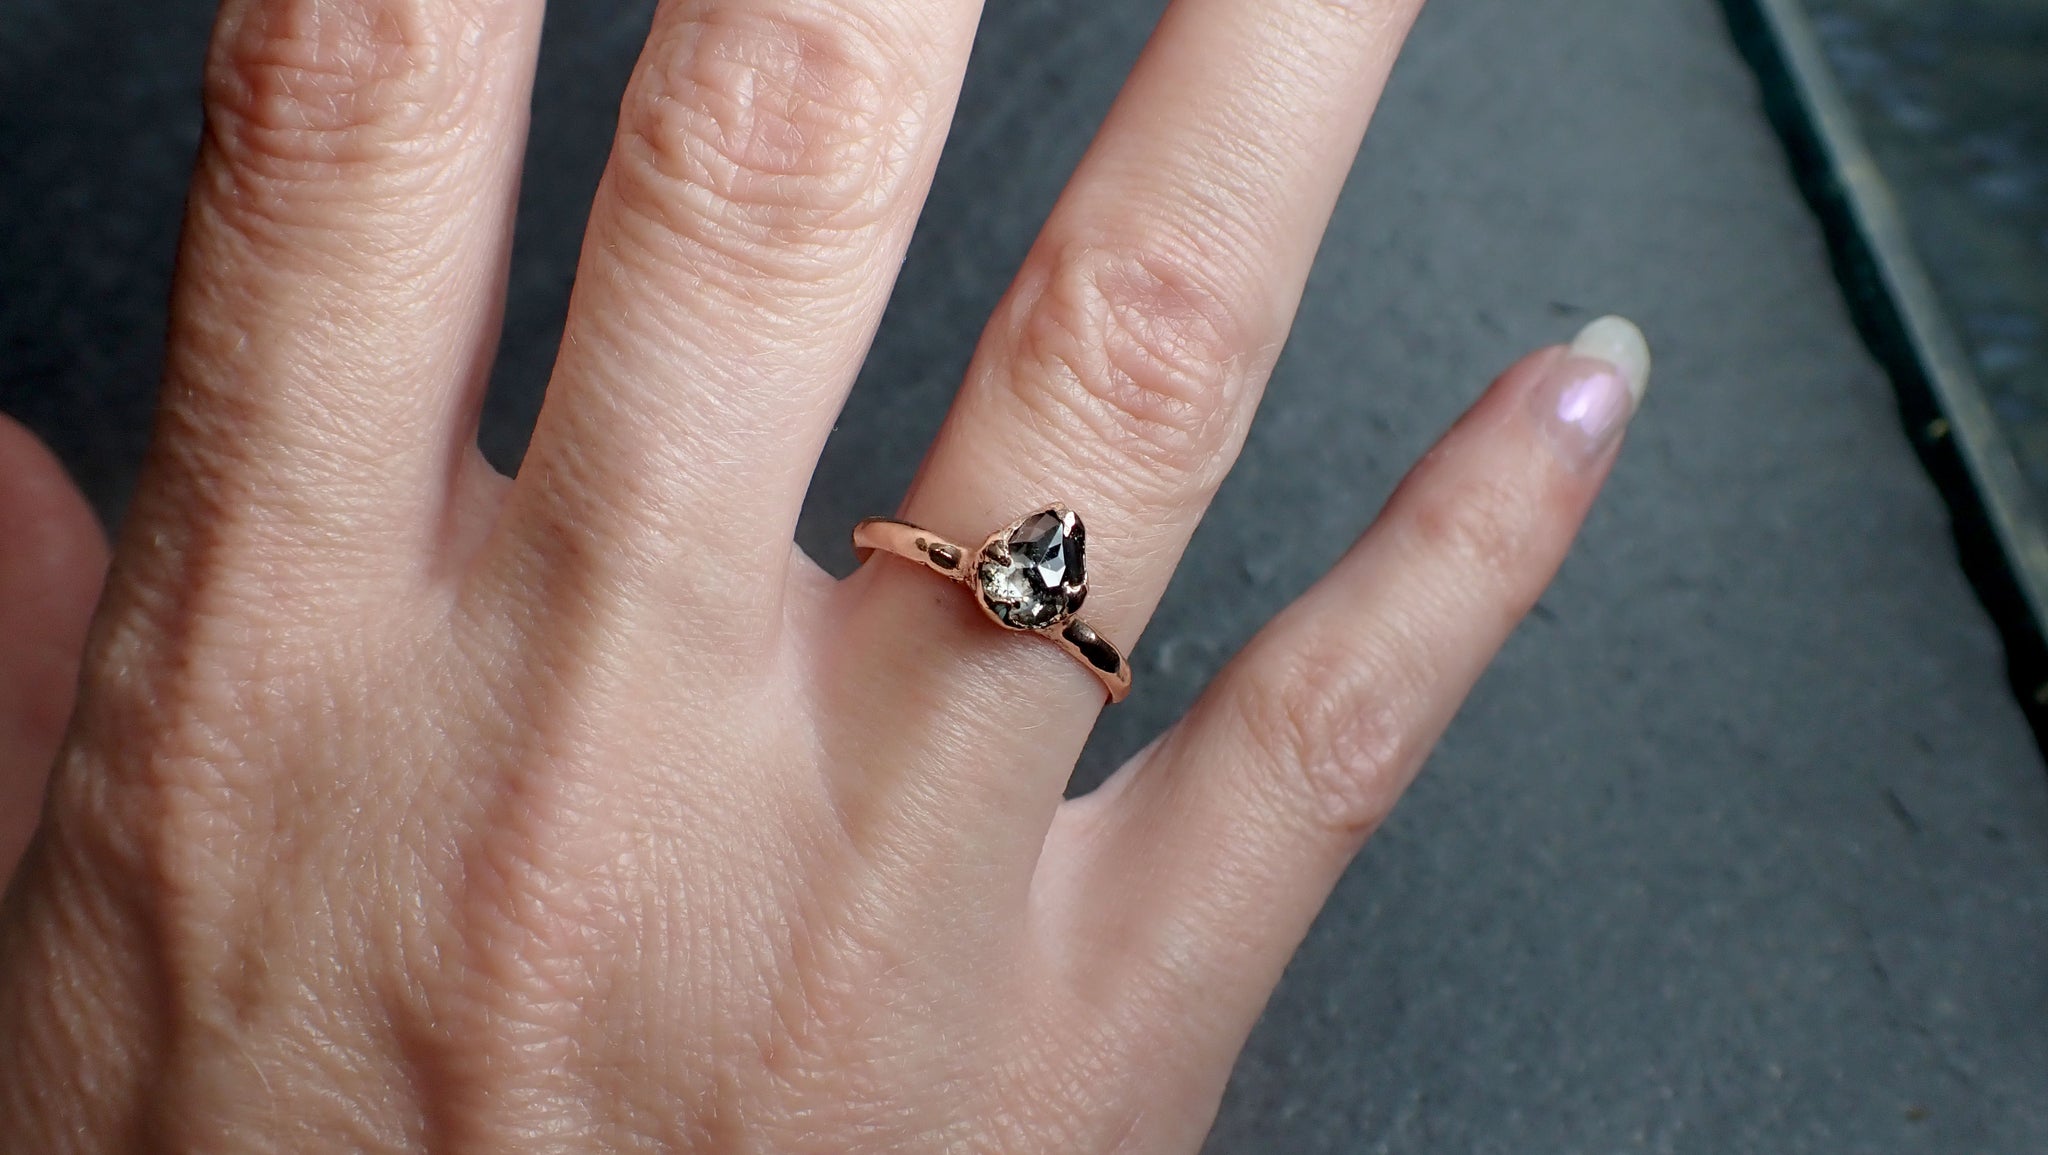 Faceted Fancy cut Salt and Pepper Diamond Solitaire Engagement 14k Rose Gold Wedding Ring byAngeline 2587